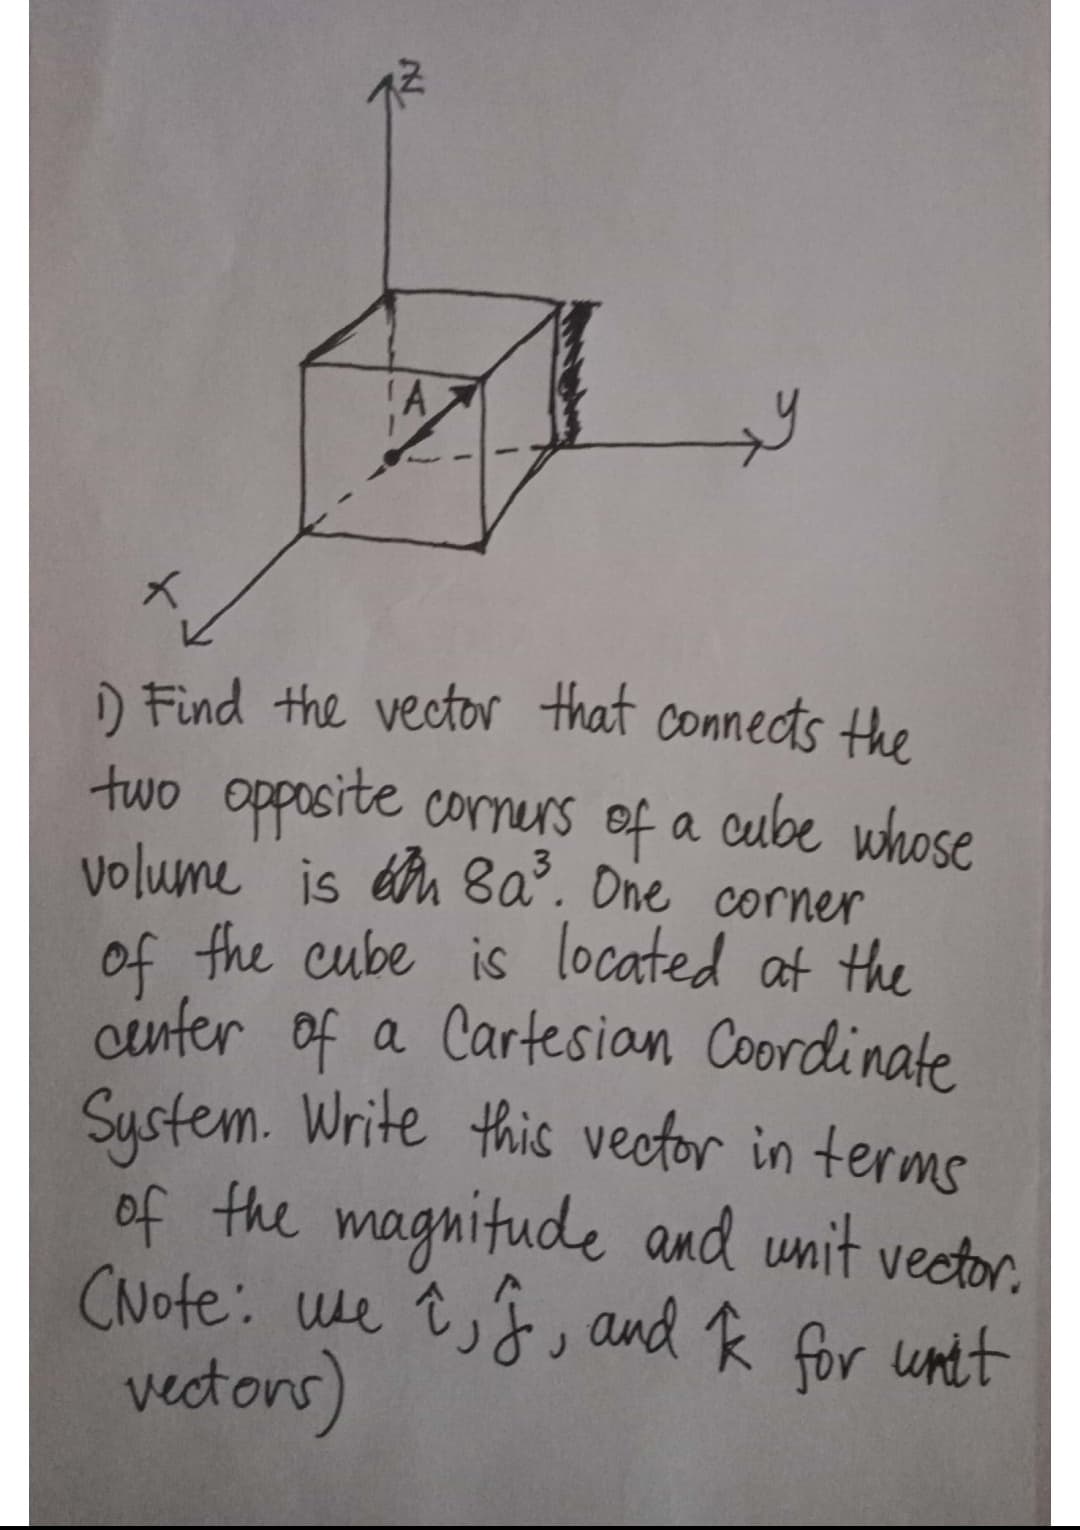 ) Find the vector that connects the
two opposite corners of a cube whose
volume is én 8a. One corner
of the cube is located at the
cinter of a Cartesian Coordinate
Sustem. Write this veotor in terms
of the magnitude and unit vector.
CNote: we t,, and R for unt
vectons)
